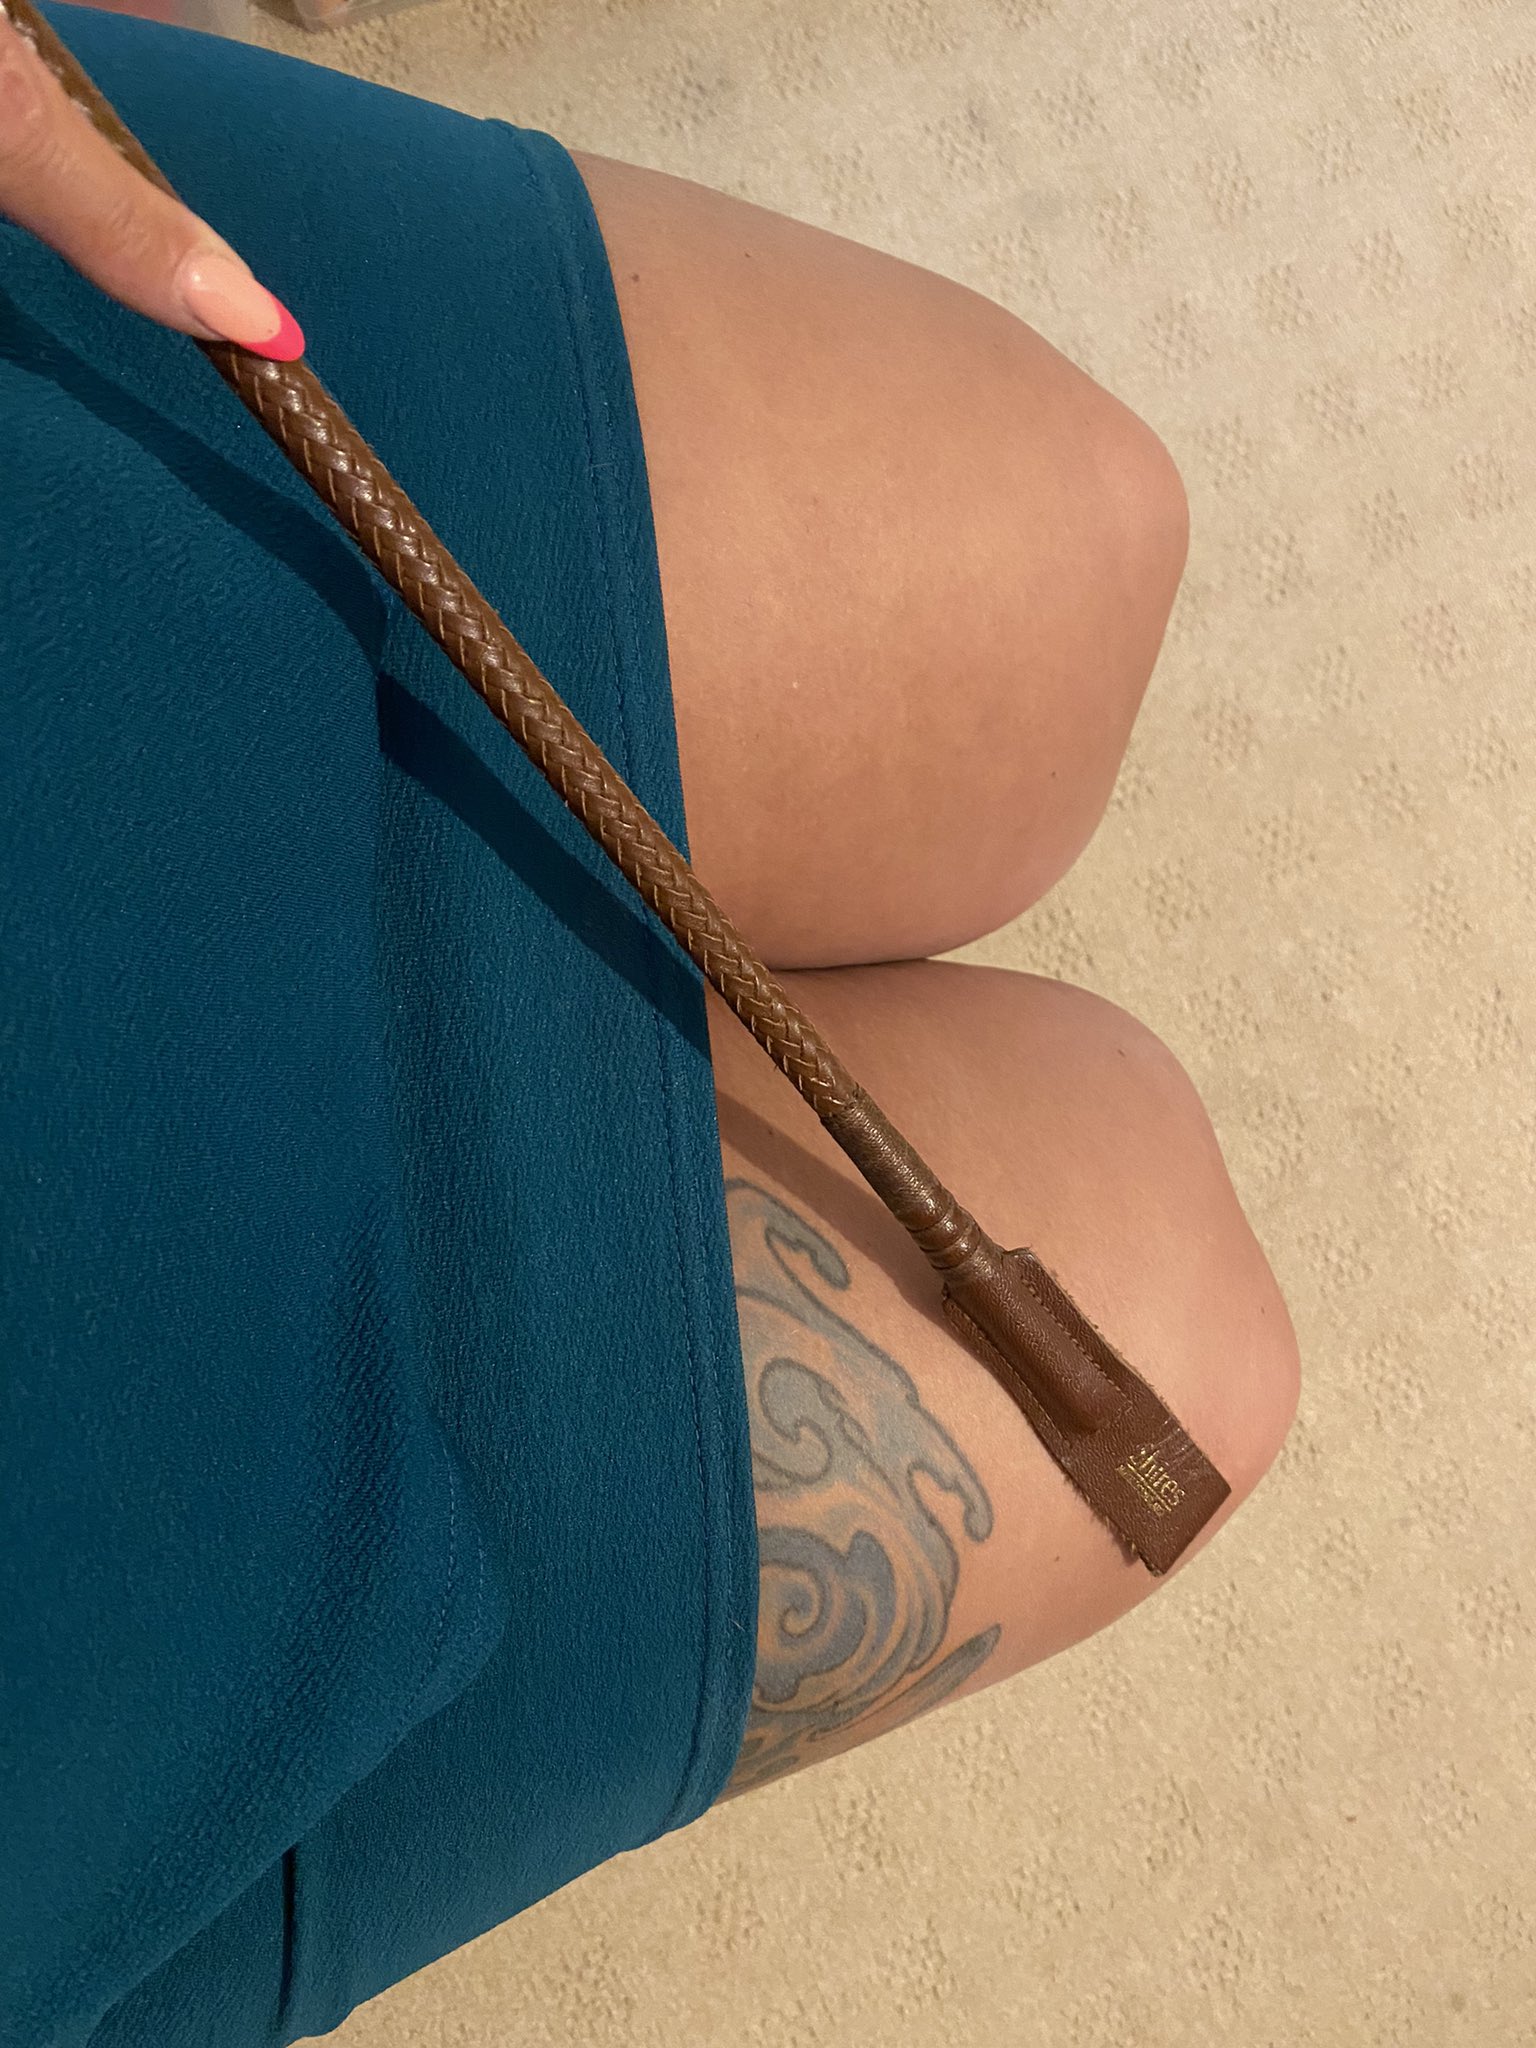 Fleshy thighs, short skirt and riding crop ready to punish a bottom